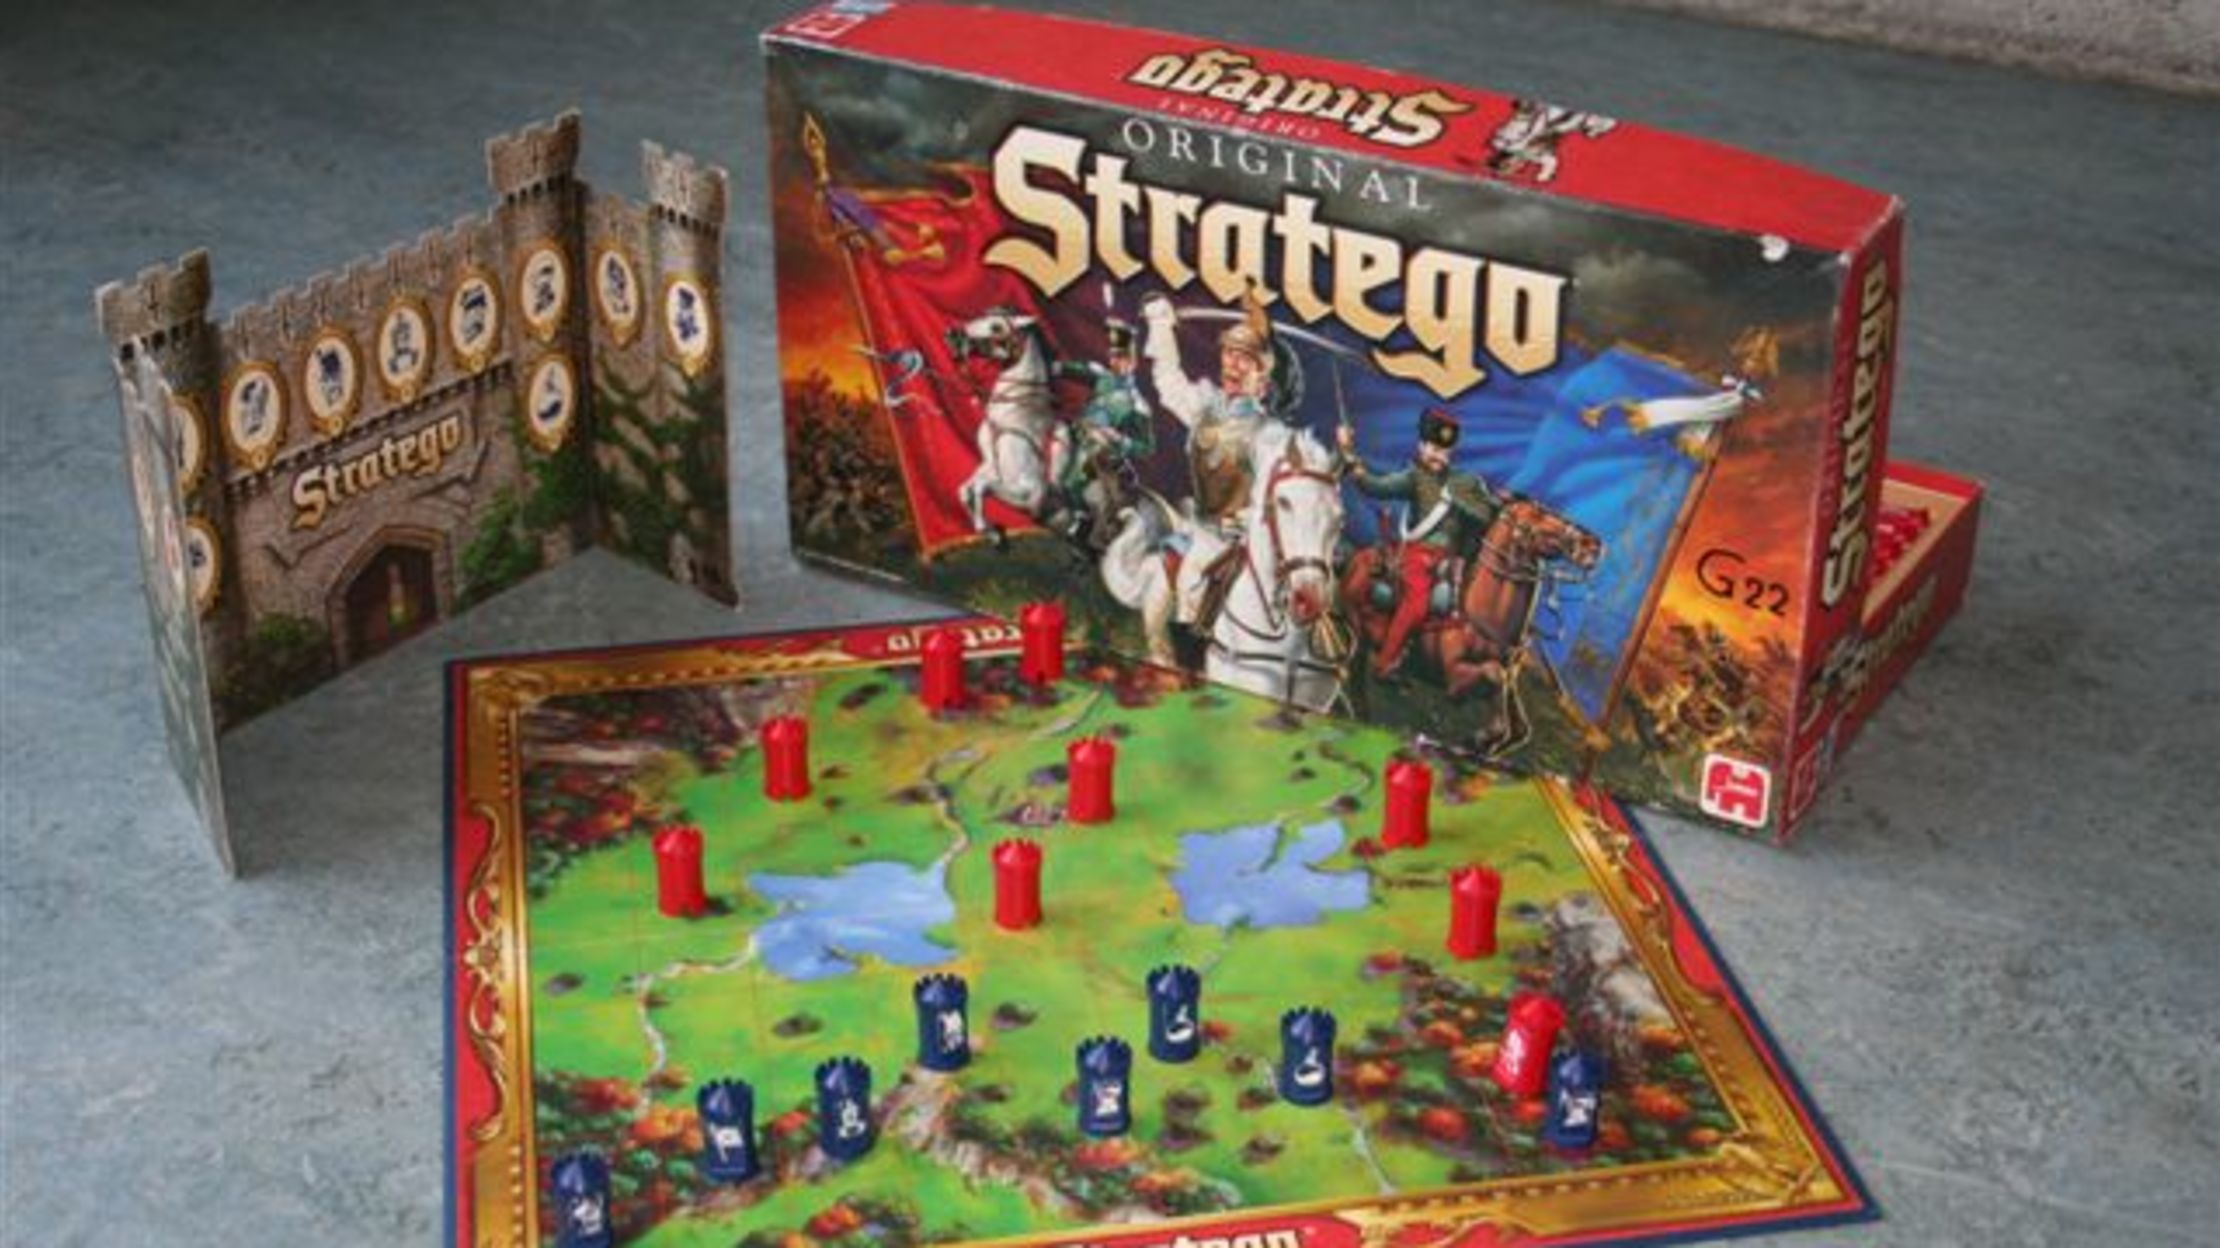 stratego game images